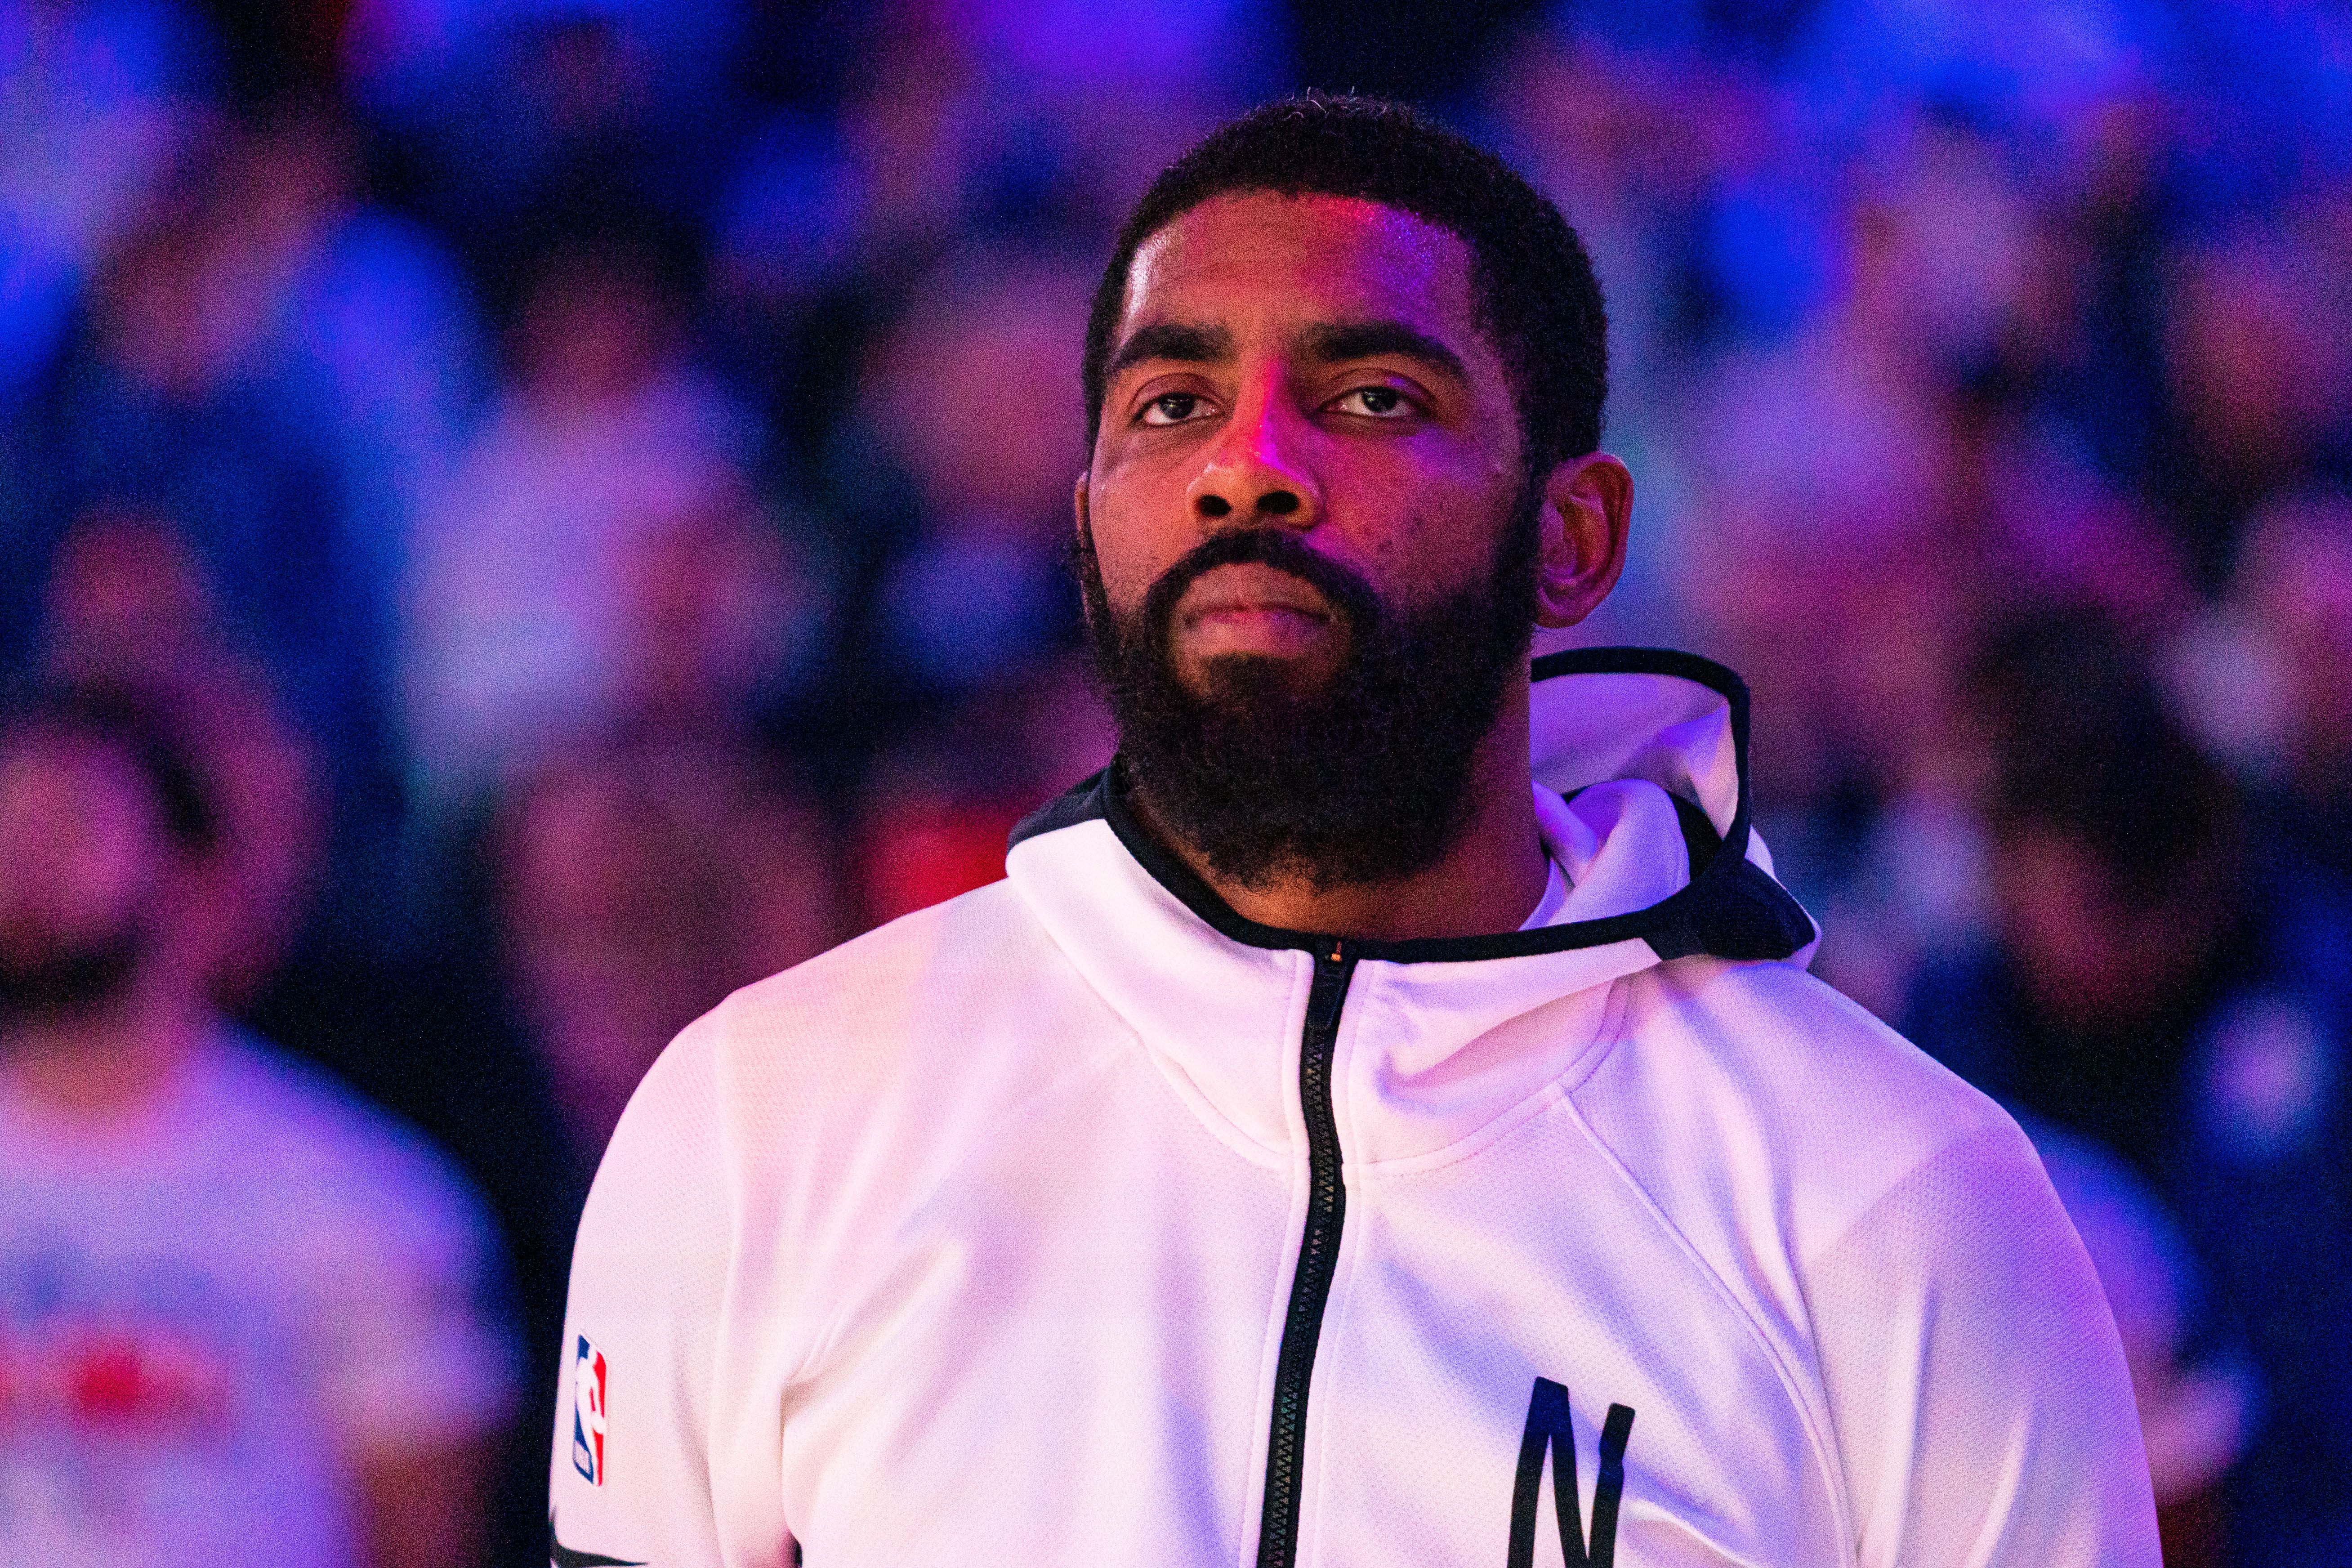 Kyrie Irving says going vegan has improved his play